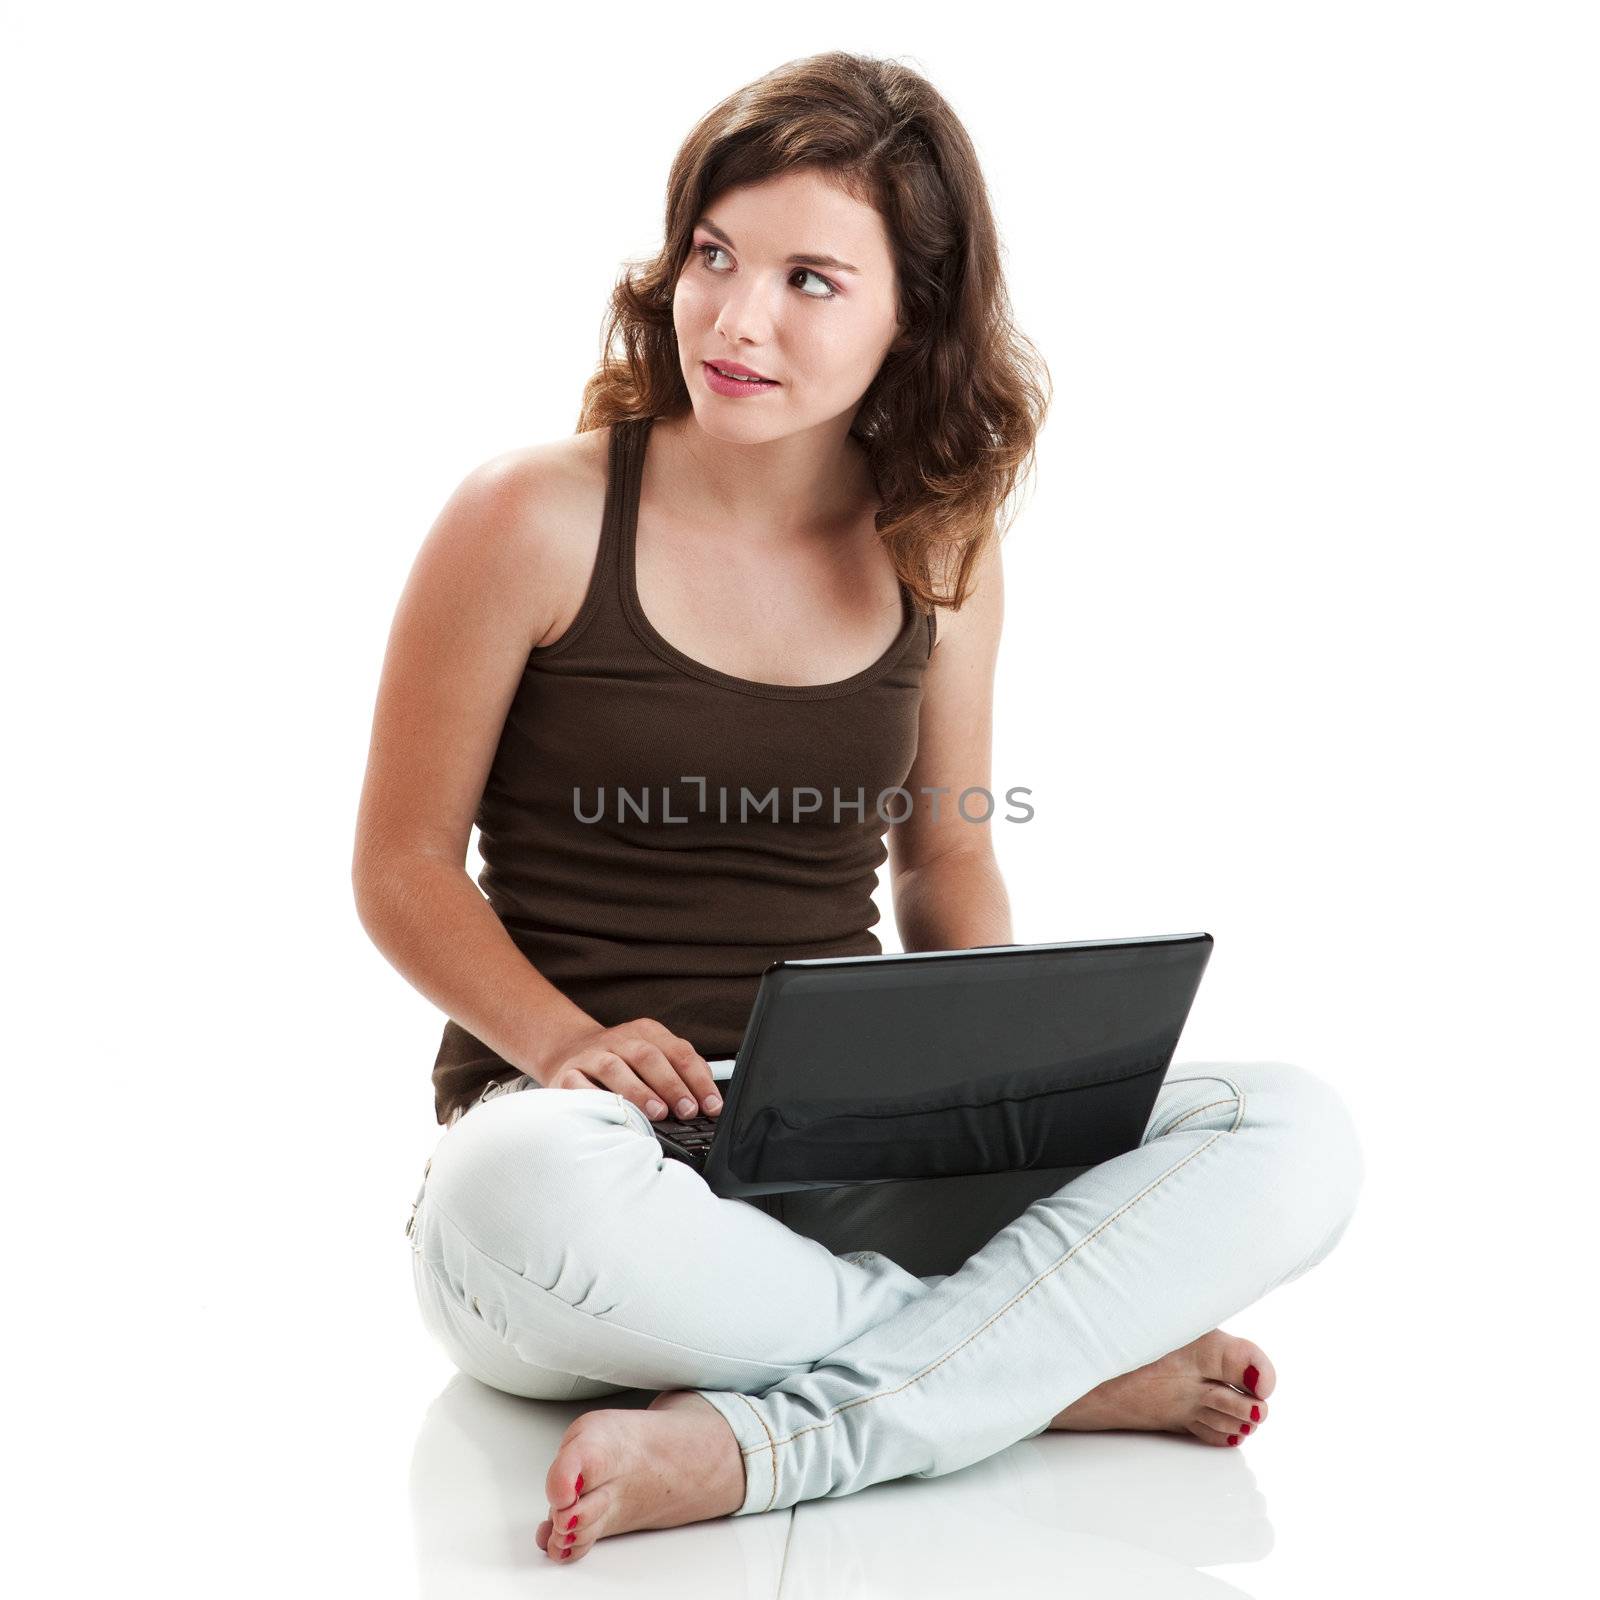 Beautiful young woman sitting on floor with a laptop, isolated on white